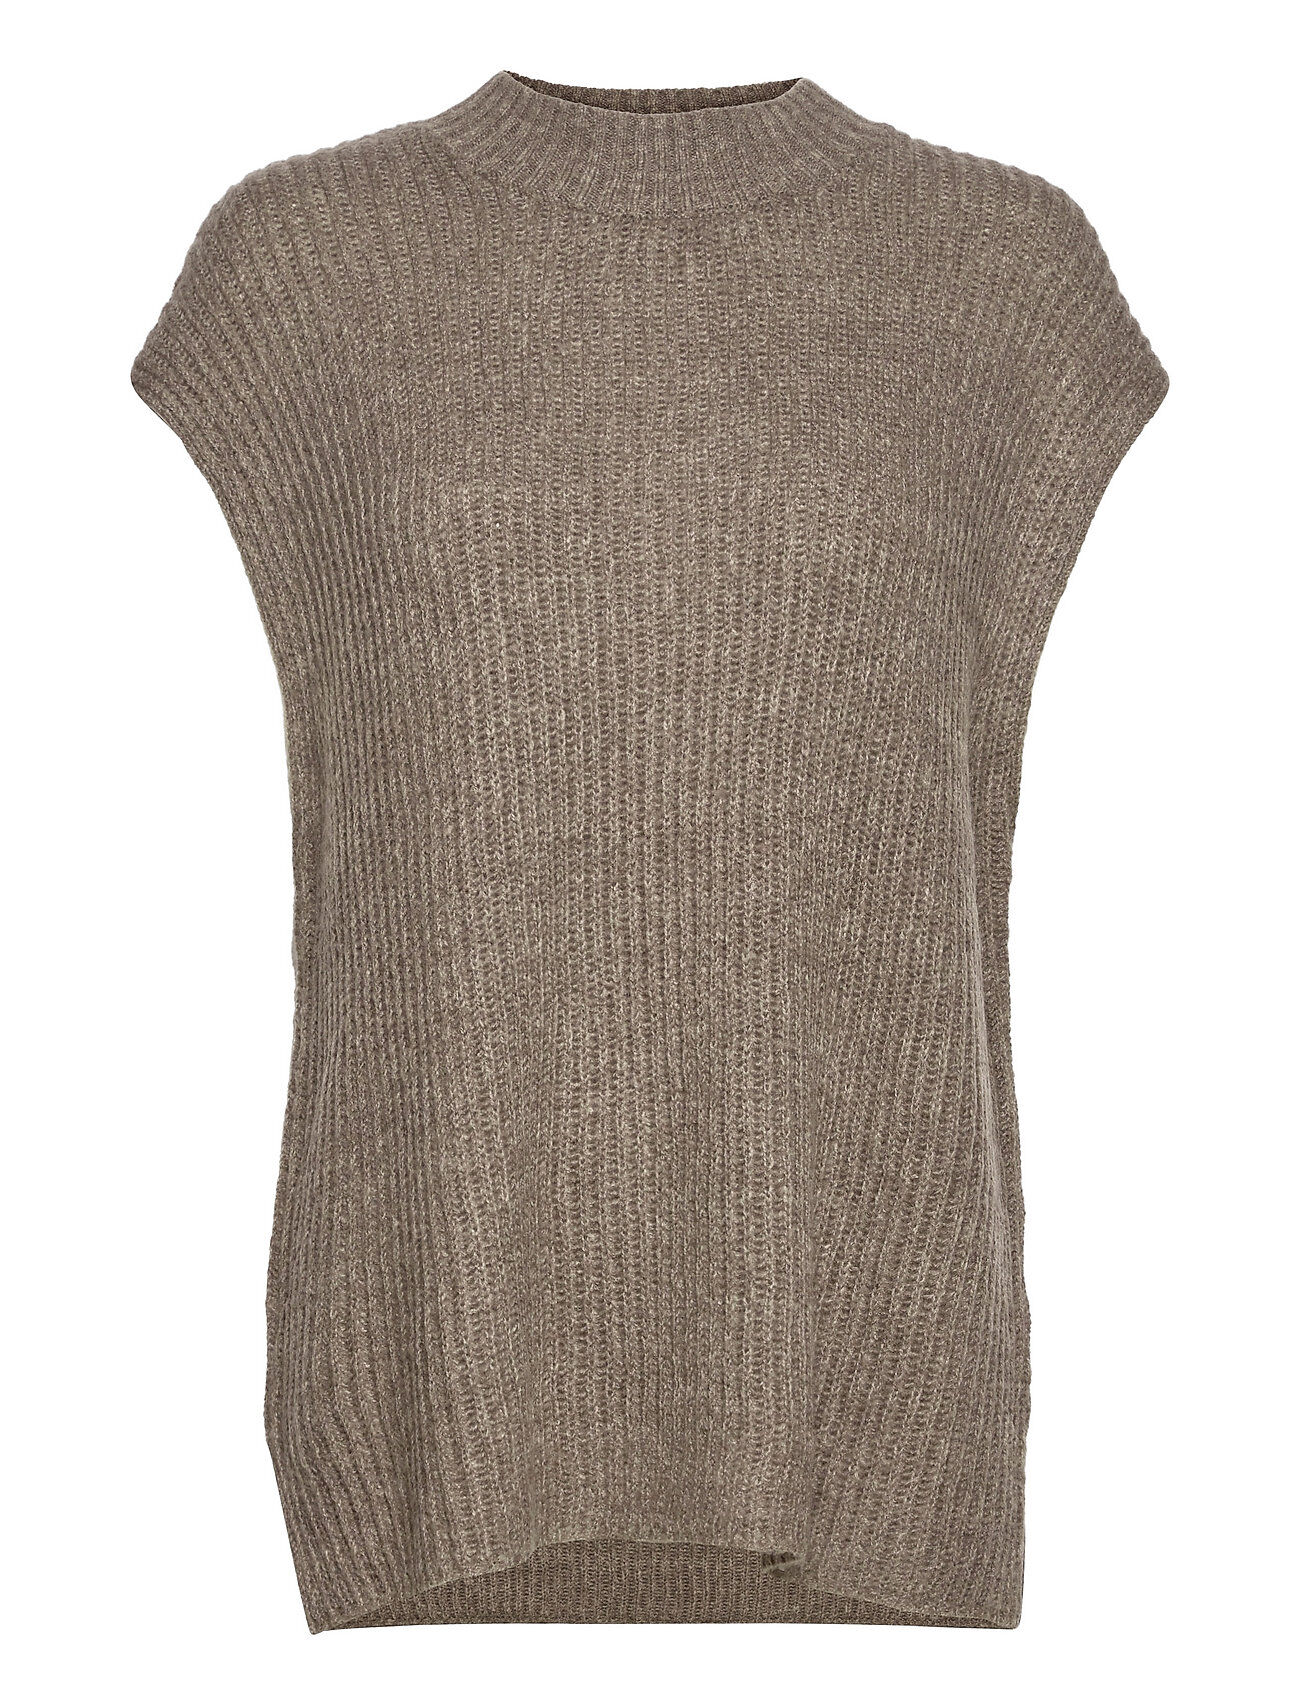 FREE/QUENT Fqawesome-Wa Knitted Vests Brun FREE/QUENT